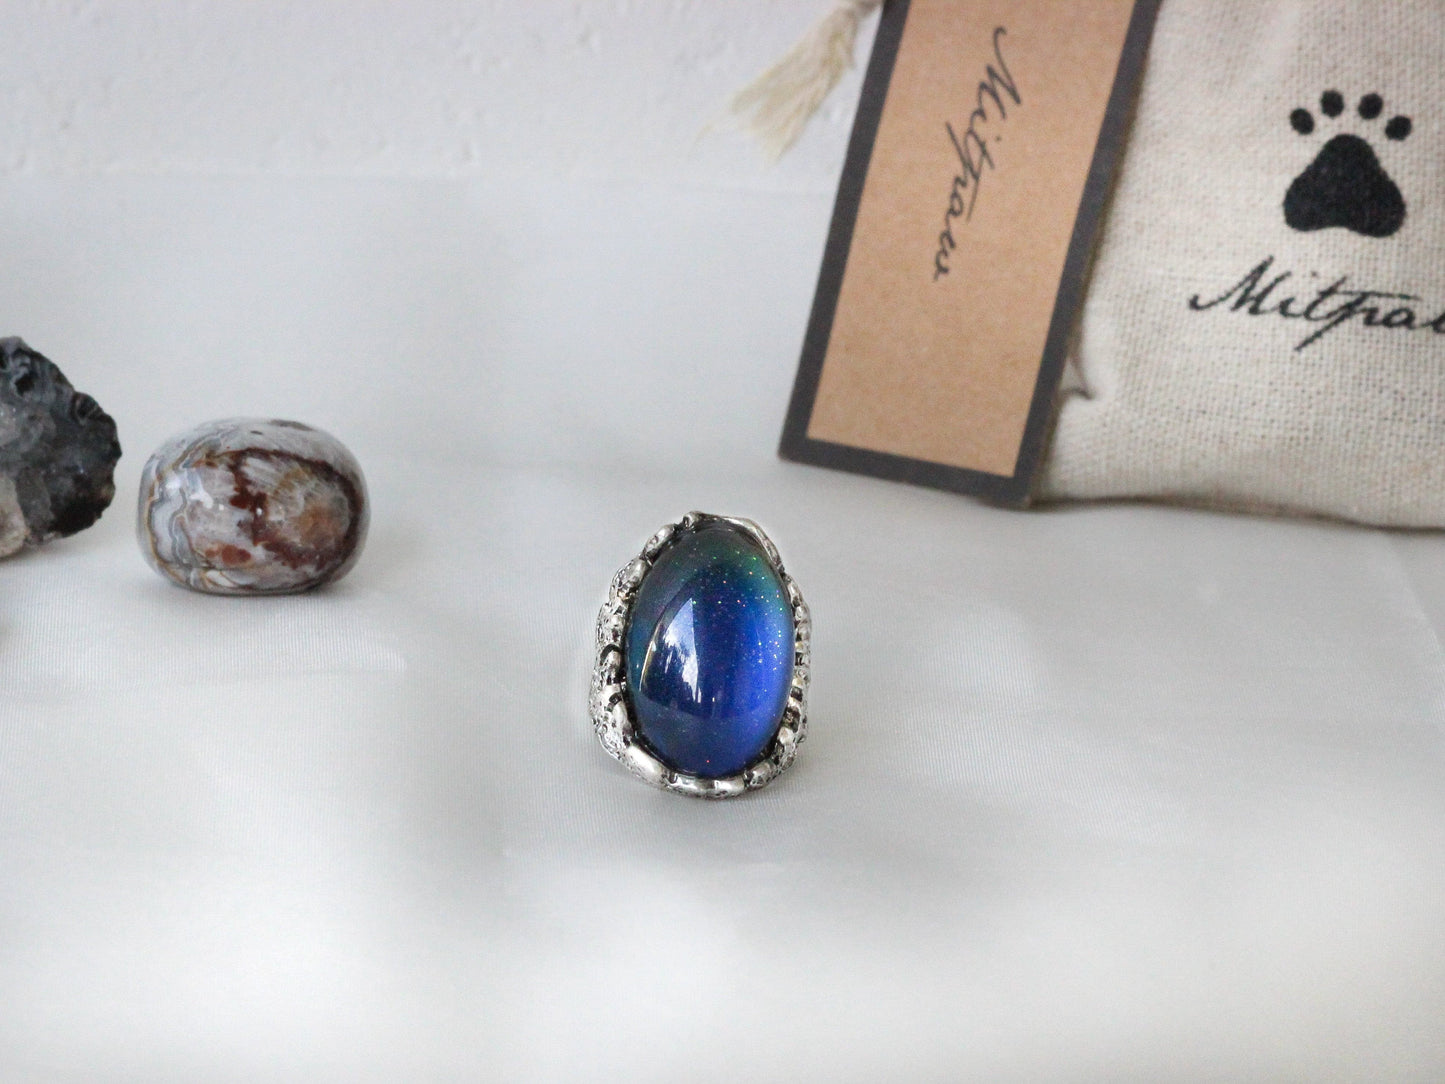 Antique Silver Plating Captured Oval Stone Mood Ring.